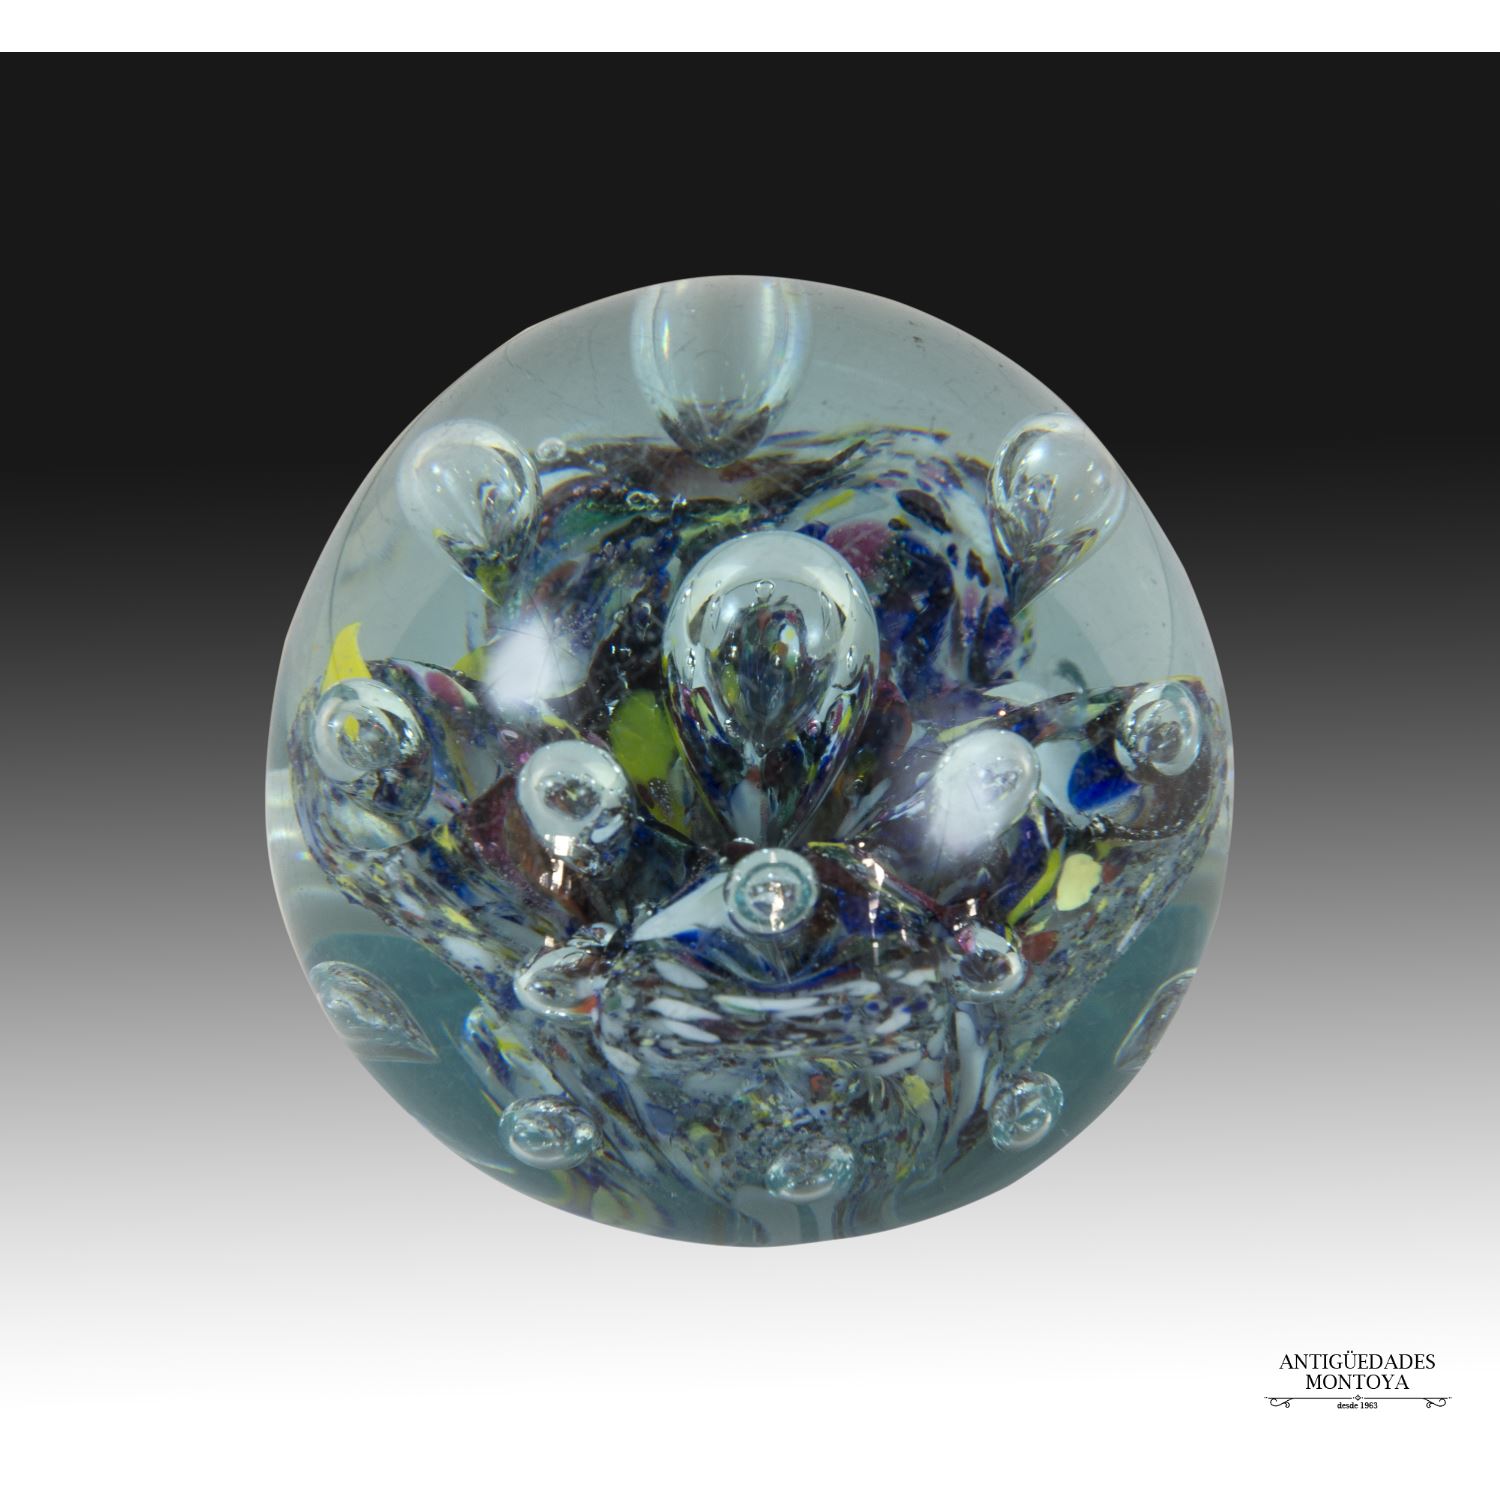 Colored glass paperweight.